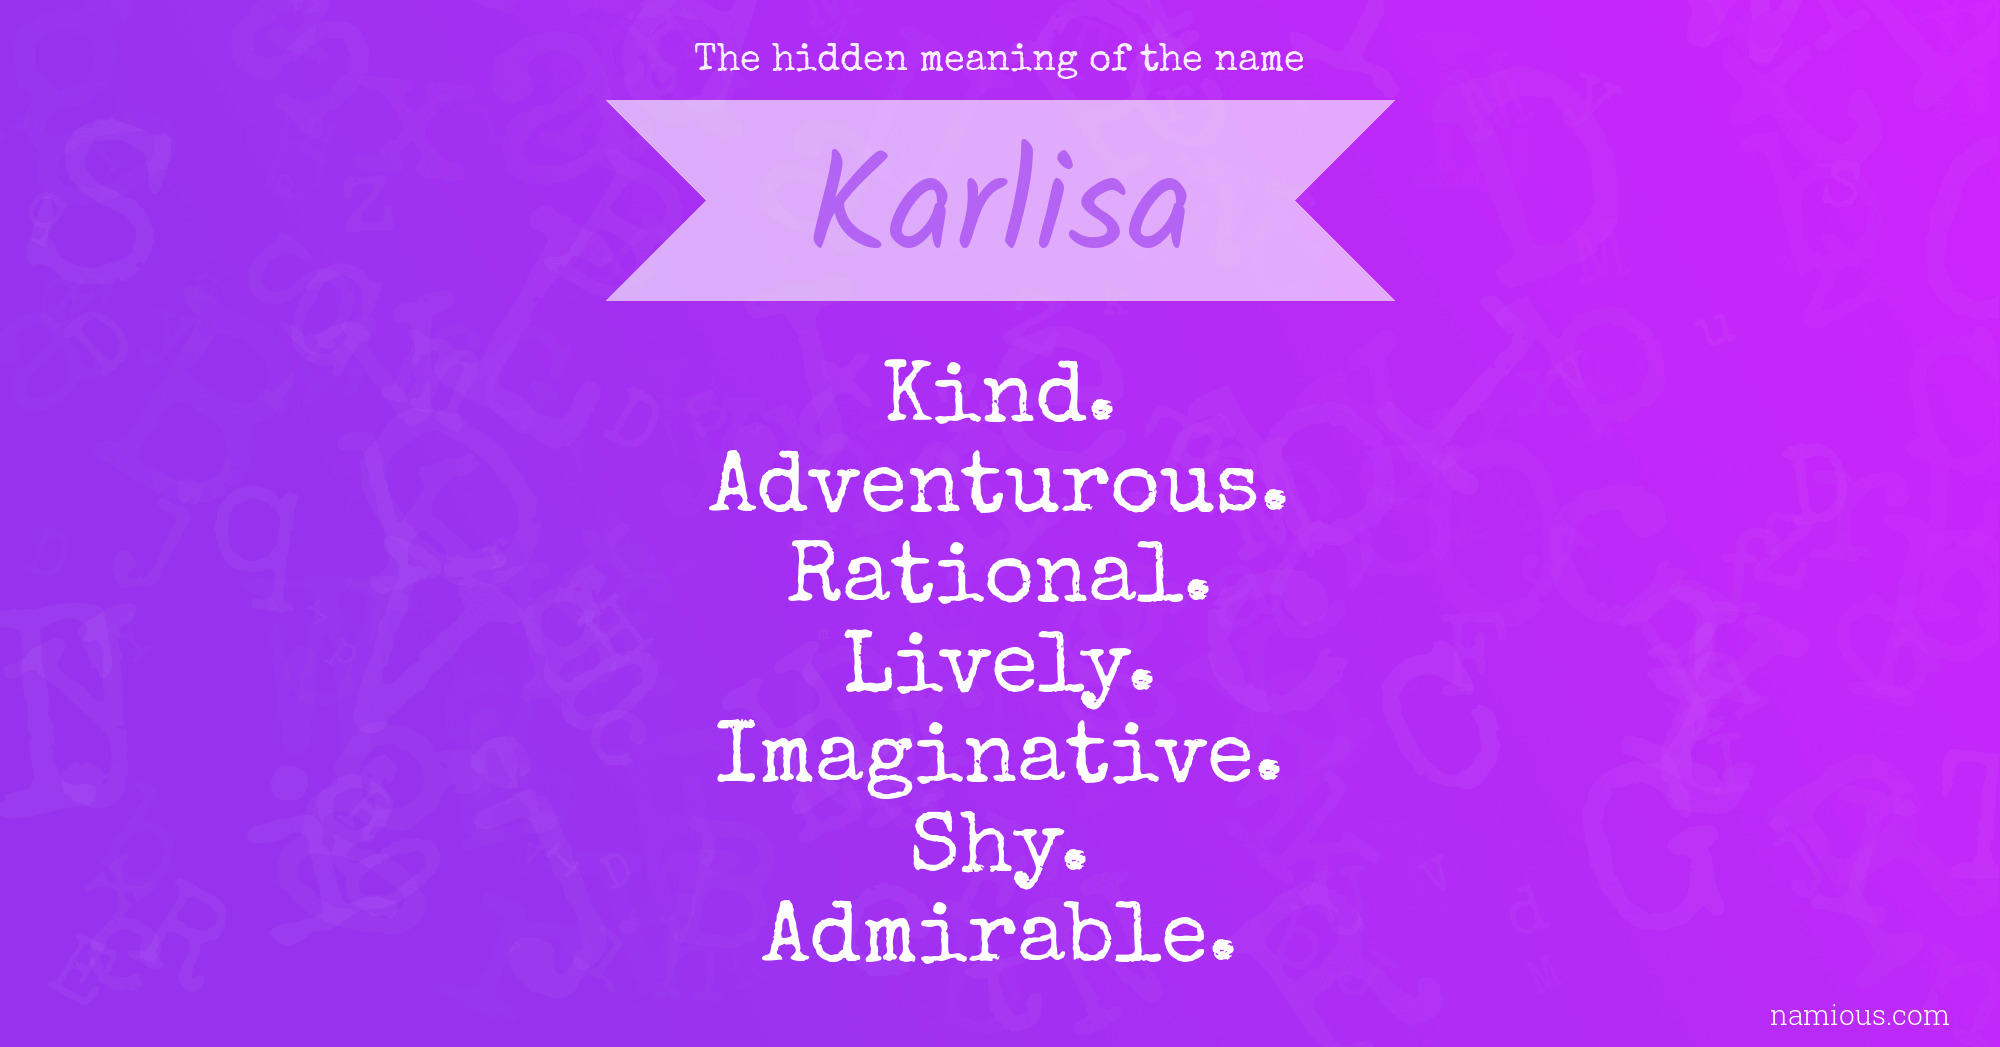 The hidden meaning of the name Karlisa